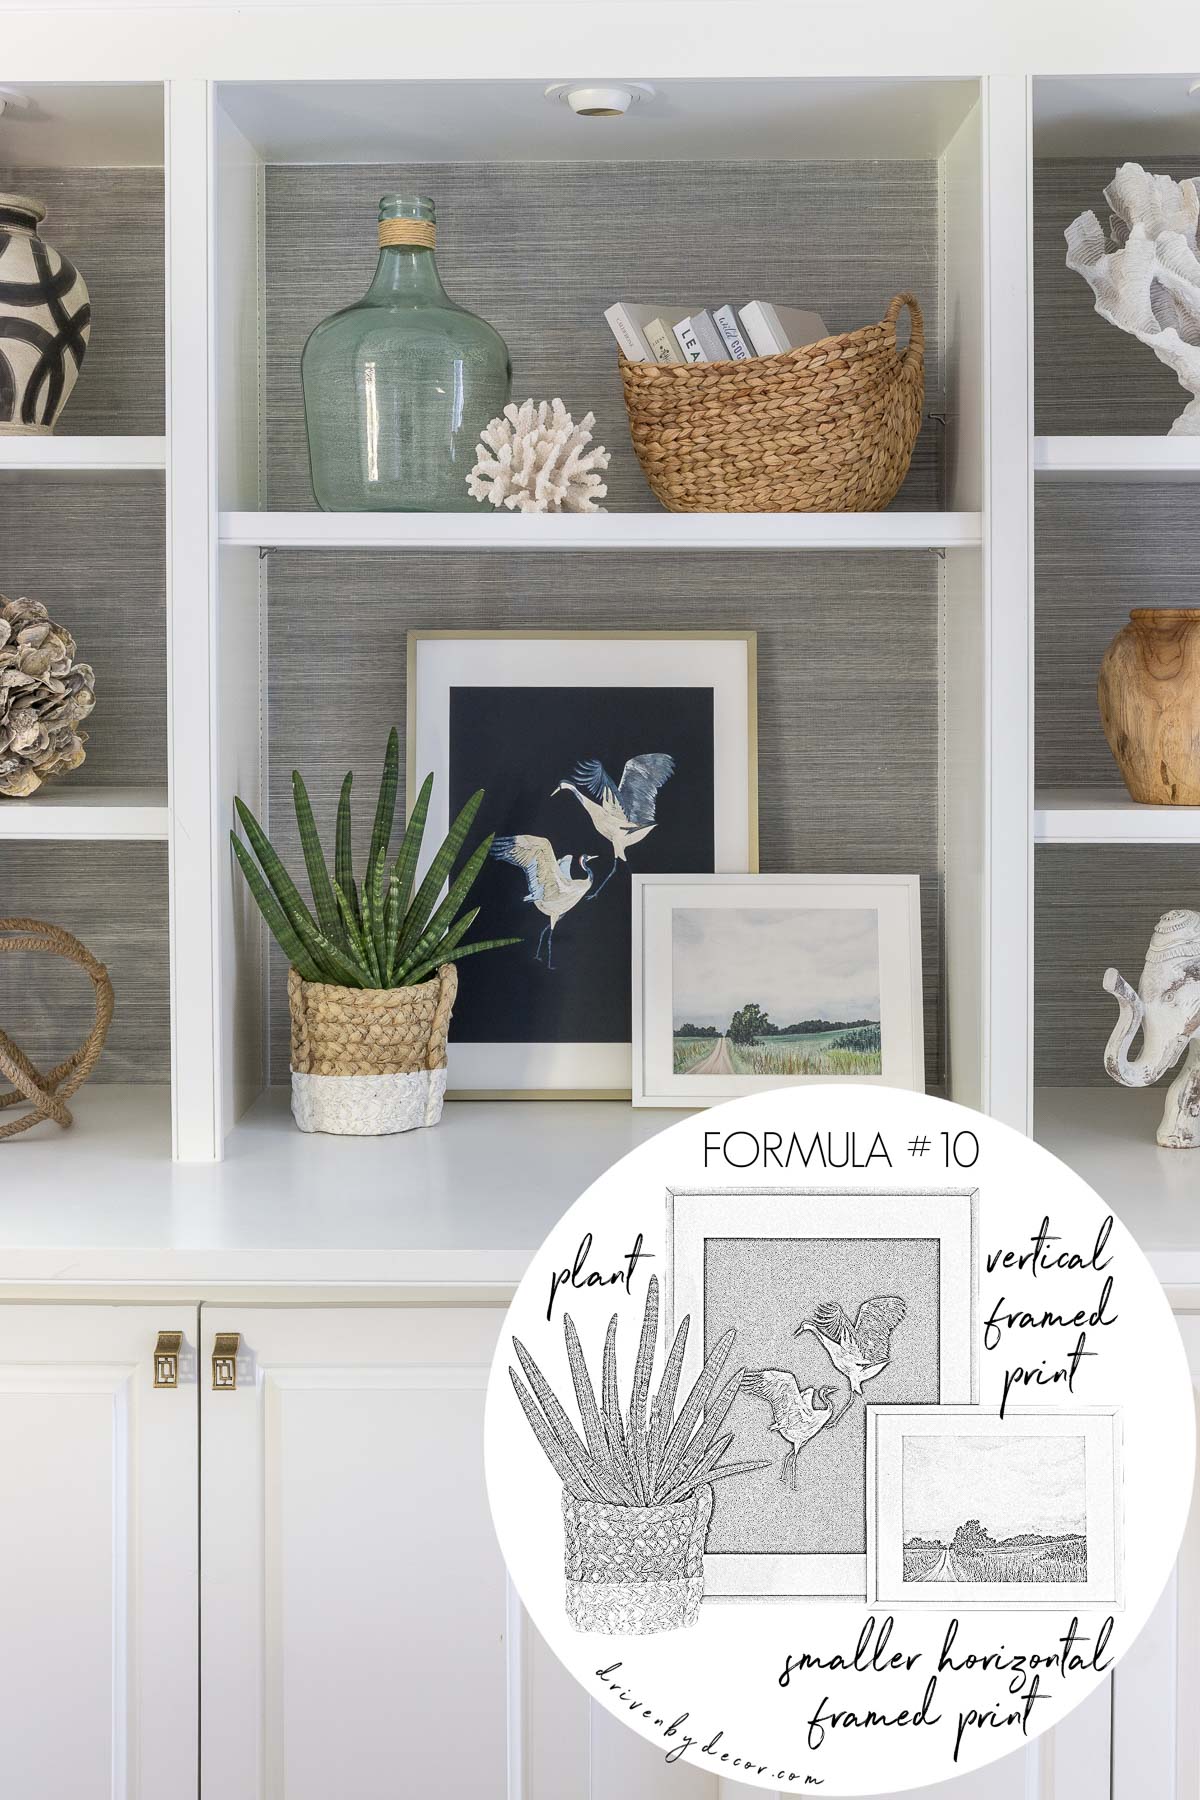 Layered framed art prints plus a plant grouped together to decorate a bookshelf